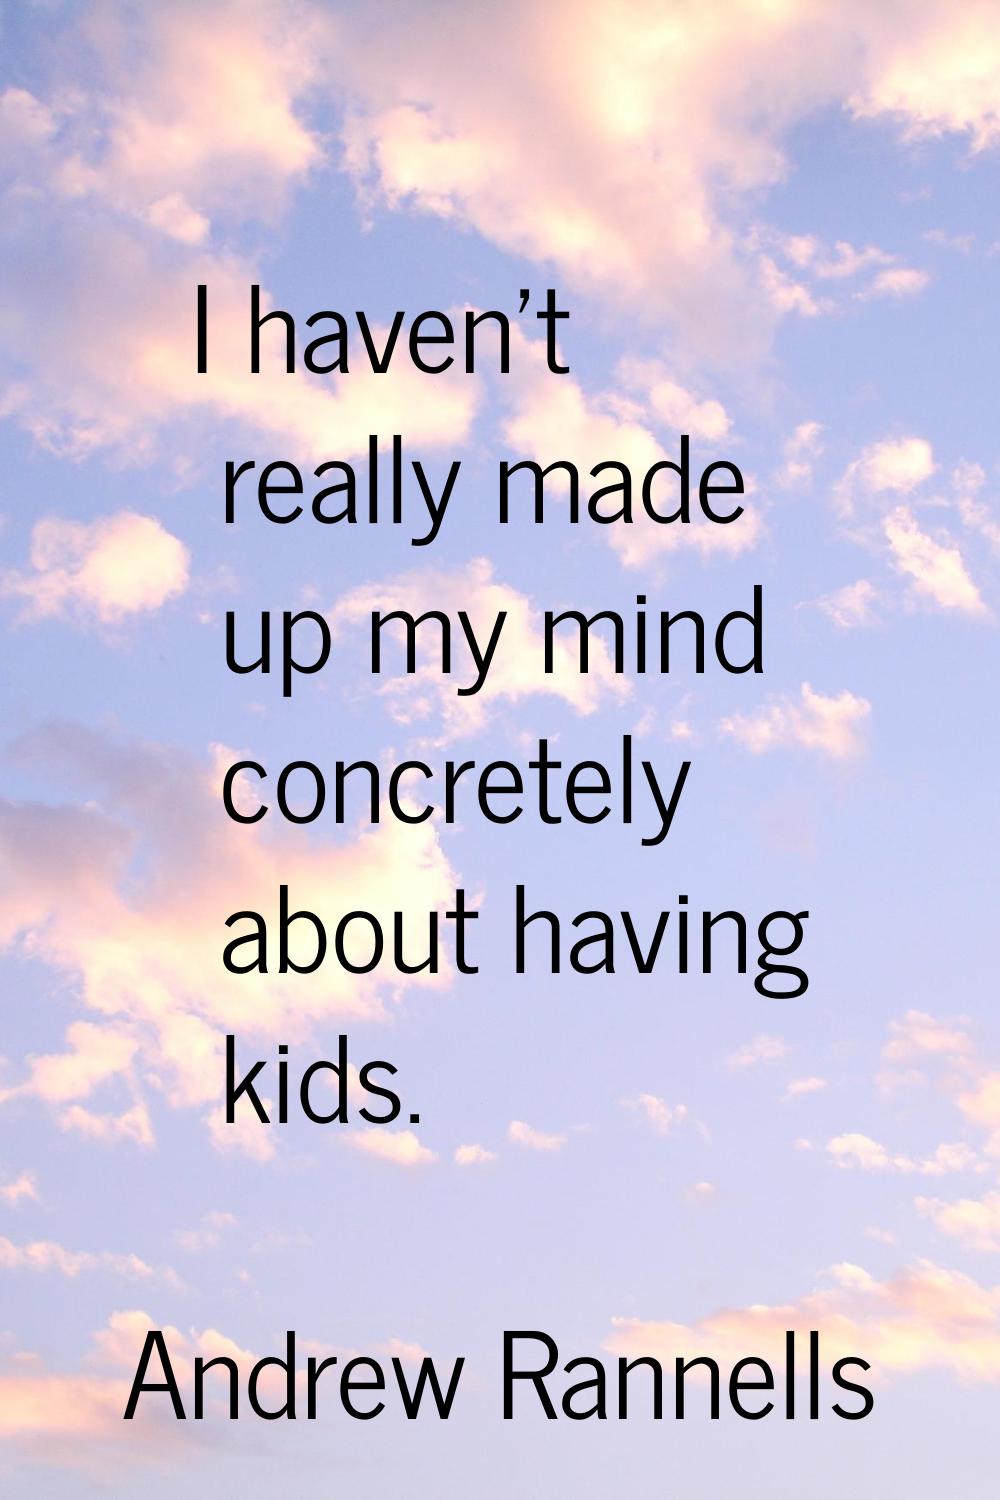 I haven't really made up my mind concretely about having kids.